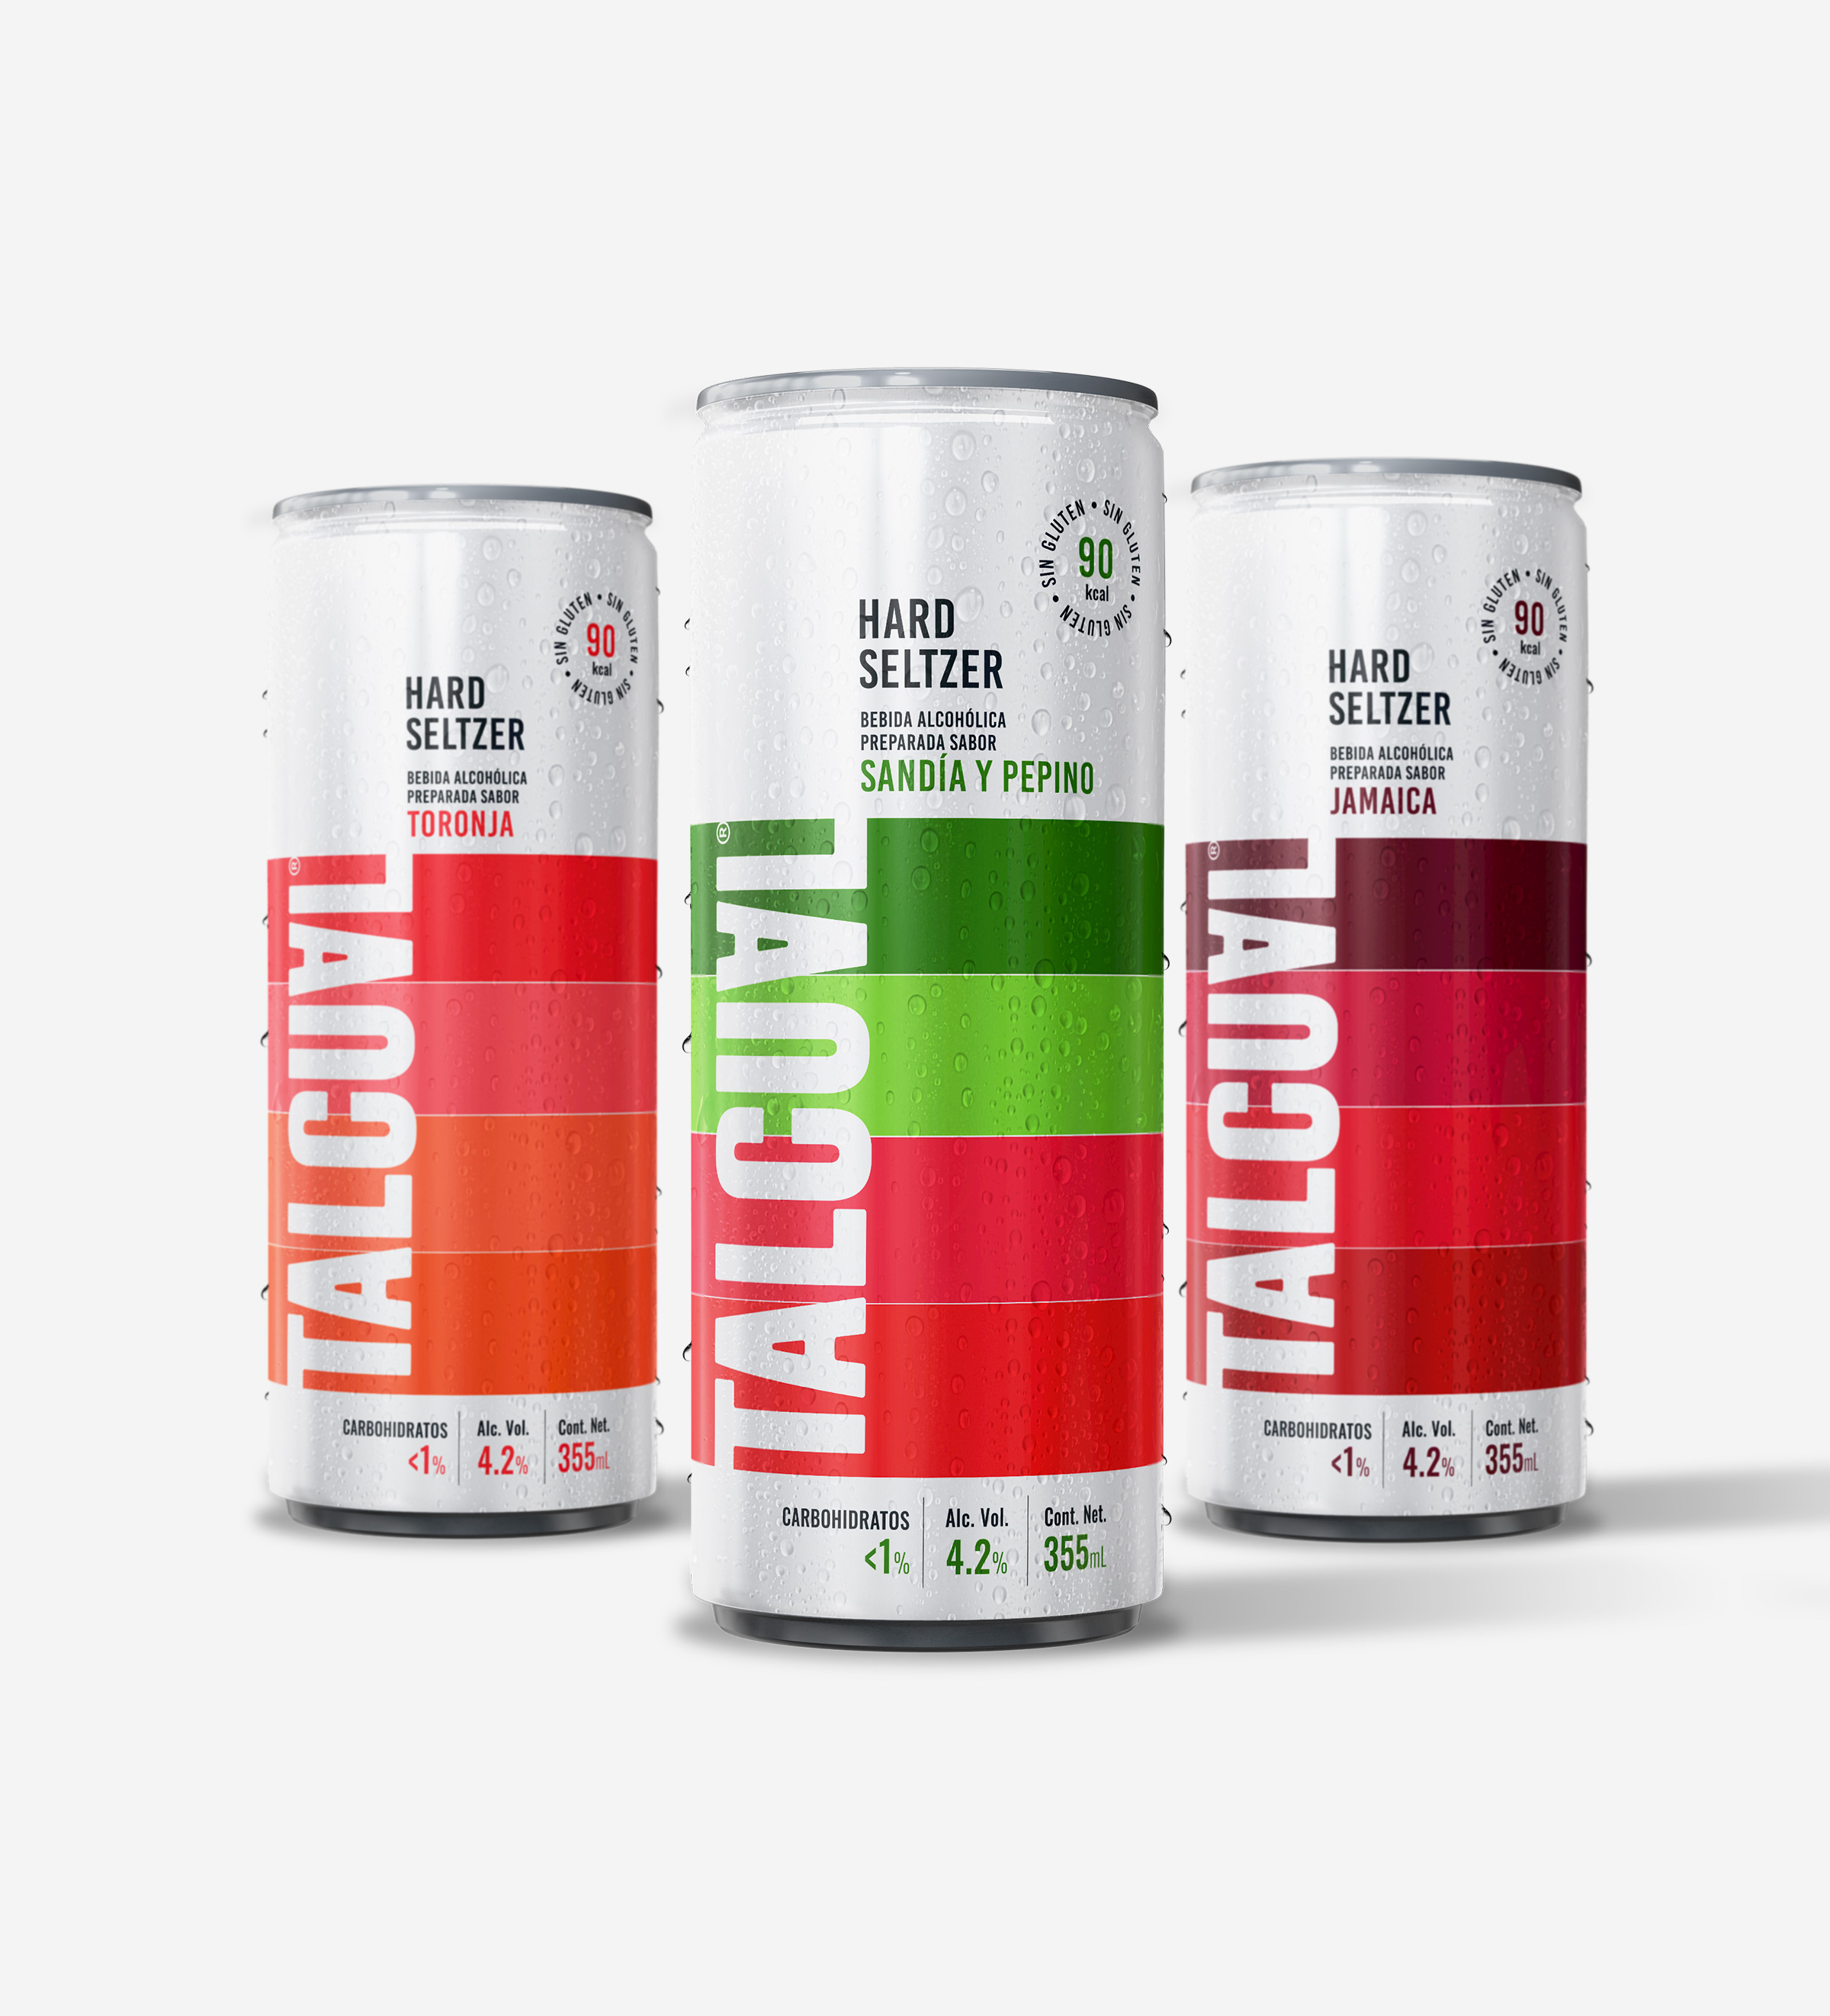 Talcual Hard Seltzer Naming, Branding and Packaging Design by Viernes